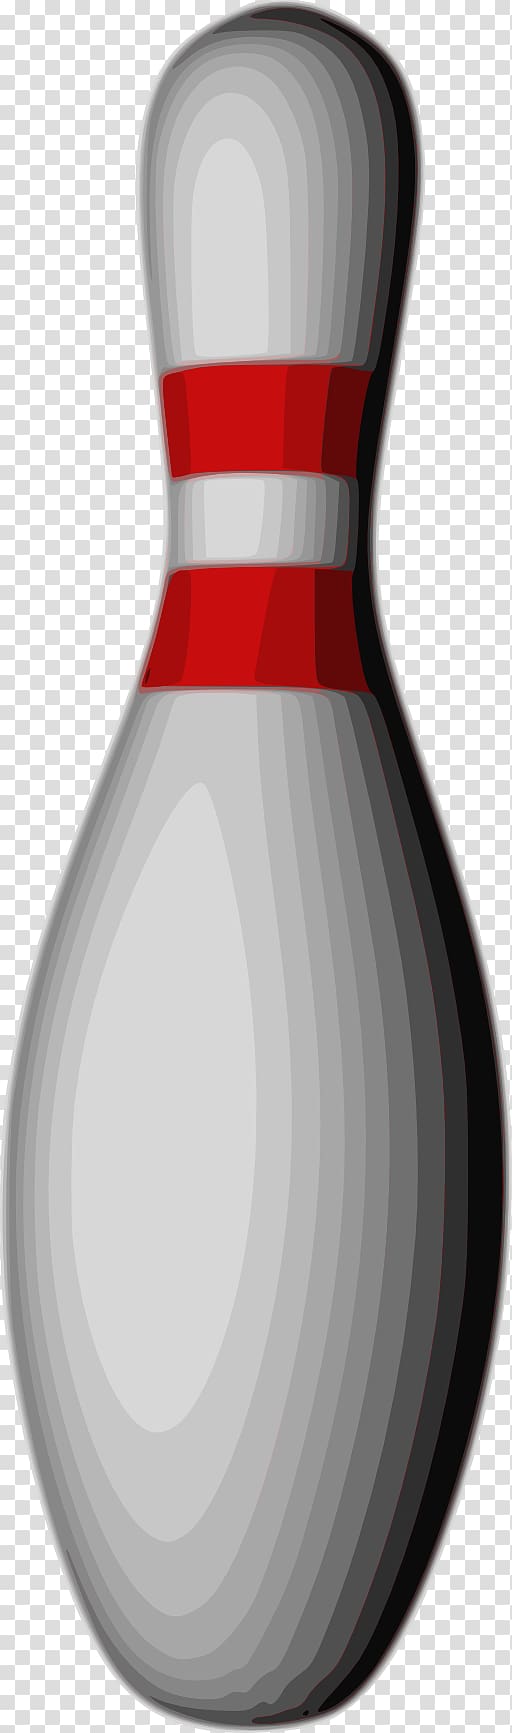 white and red bowling pin, Bowling pin transparent background PNG clipart